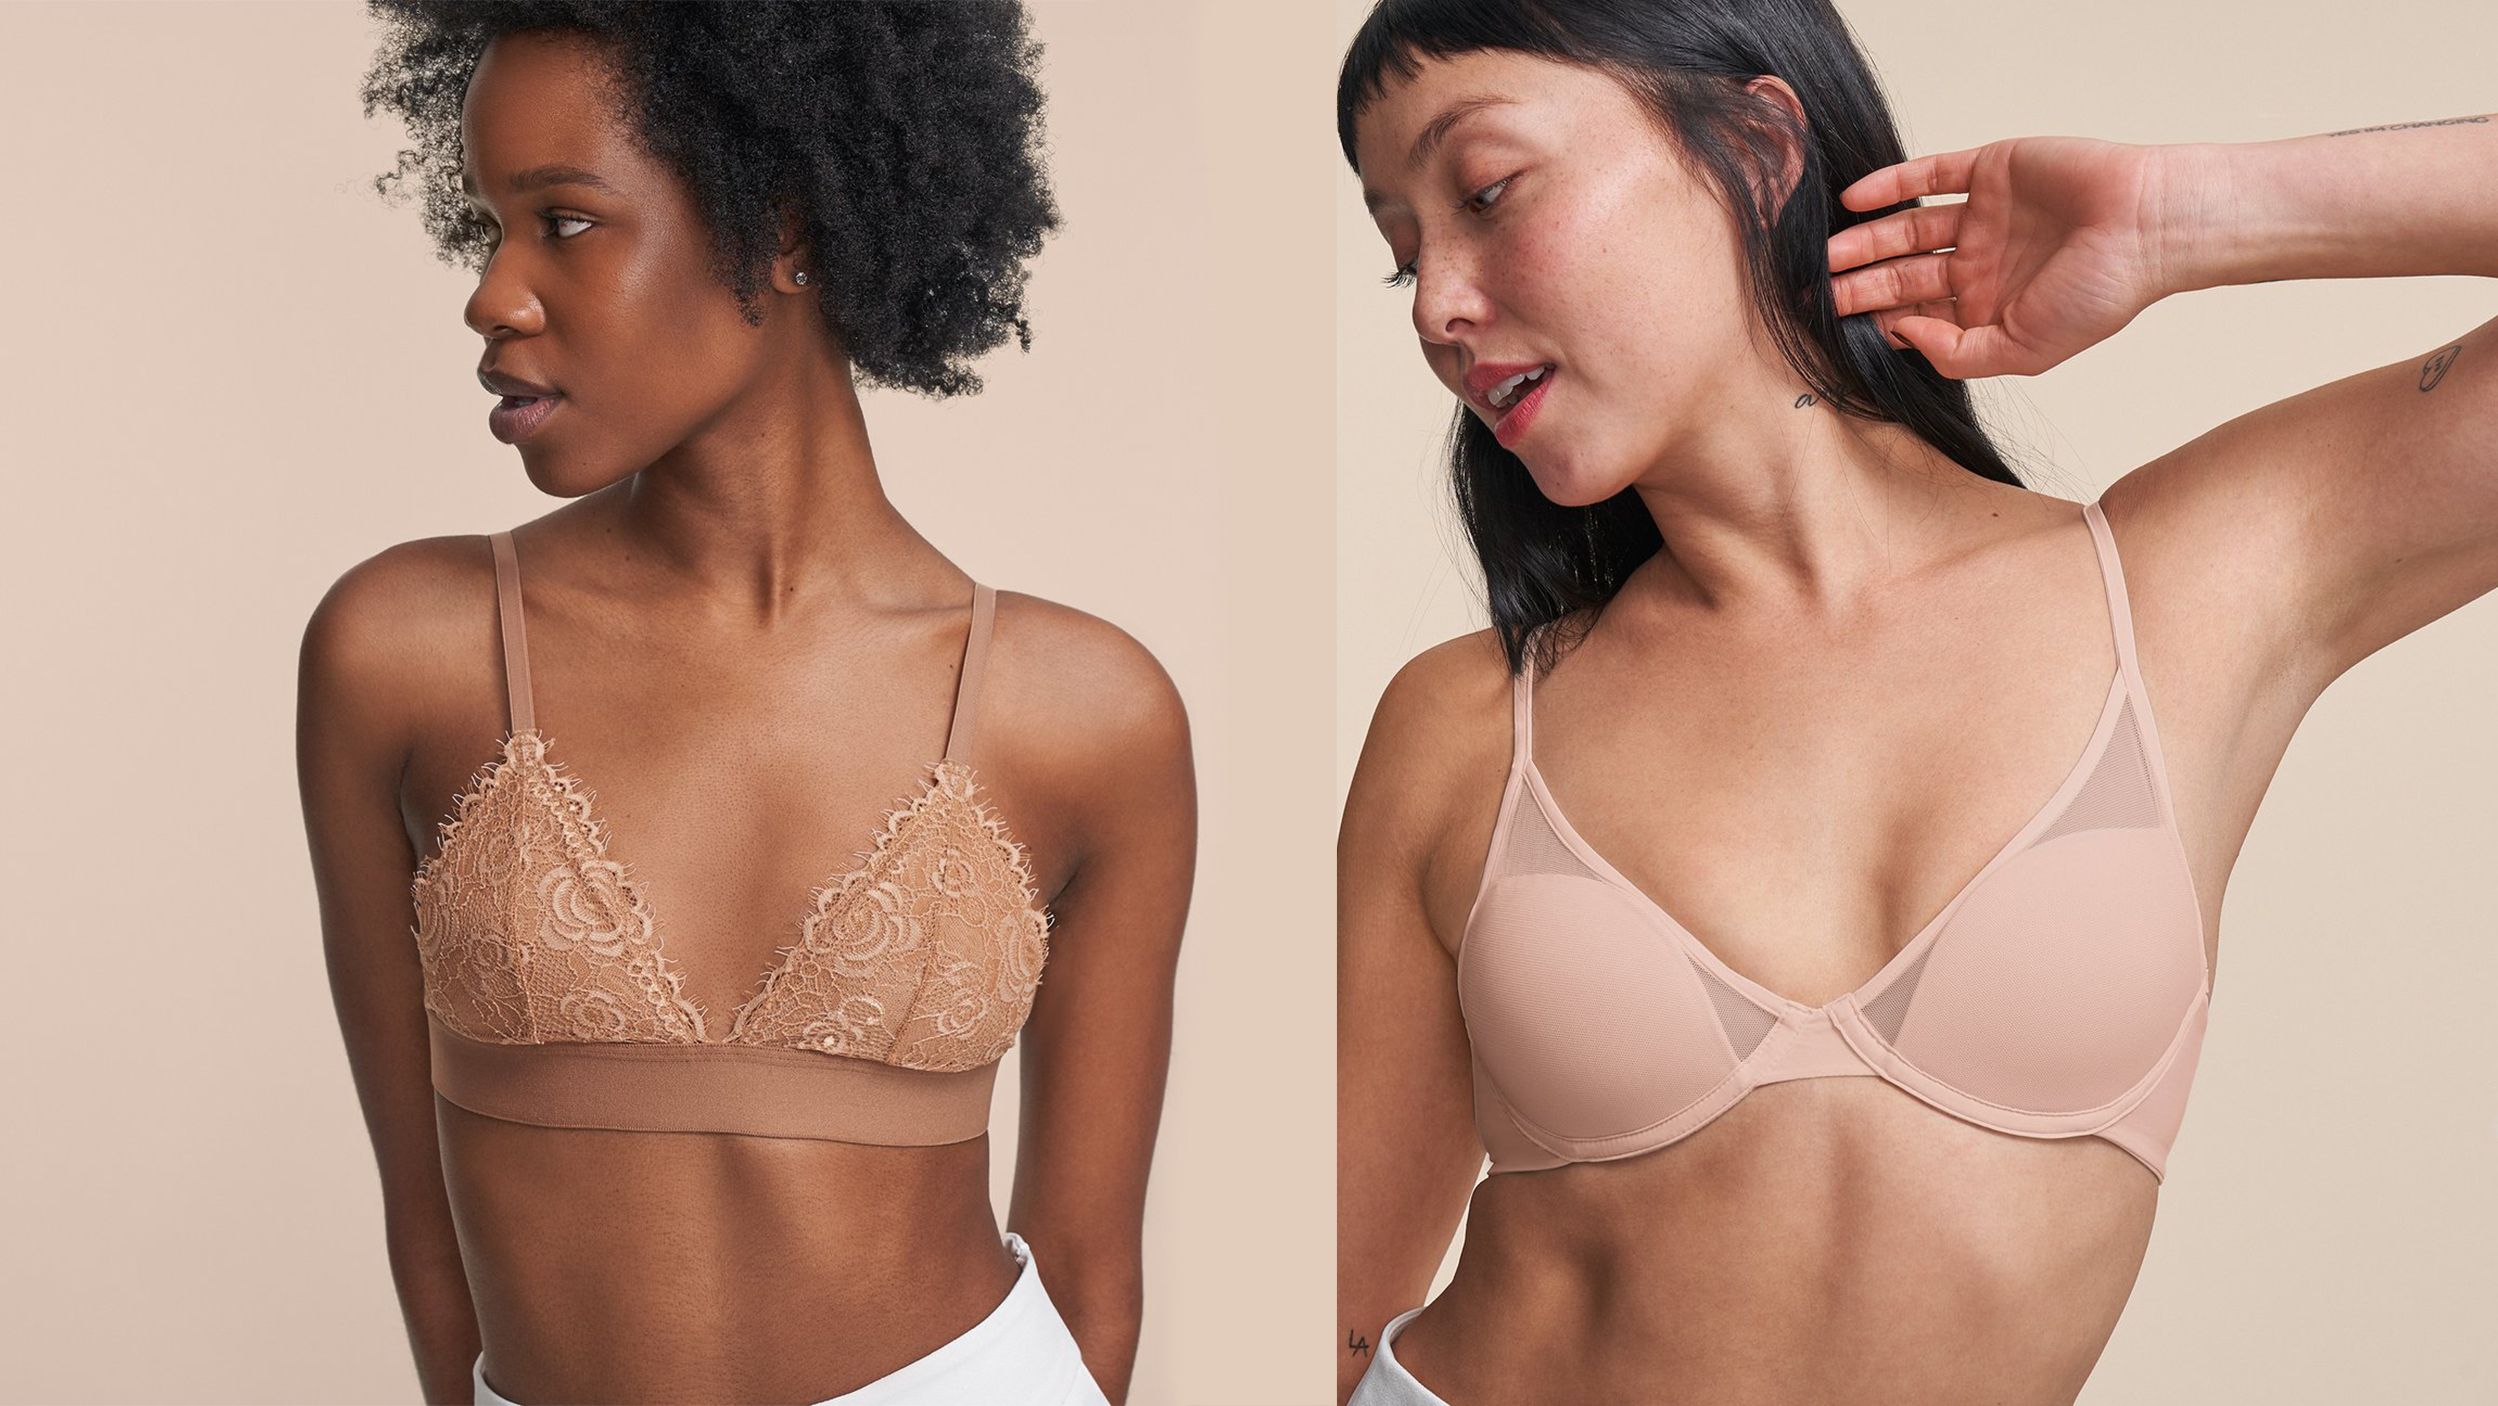 Stylish Bras With a Barely-There Feel From Warner's, True & Co